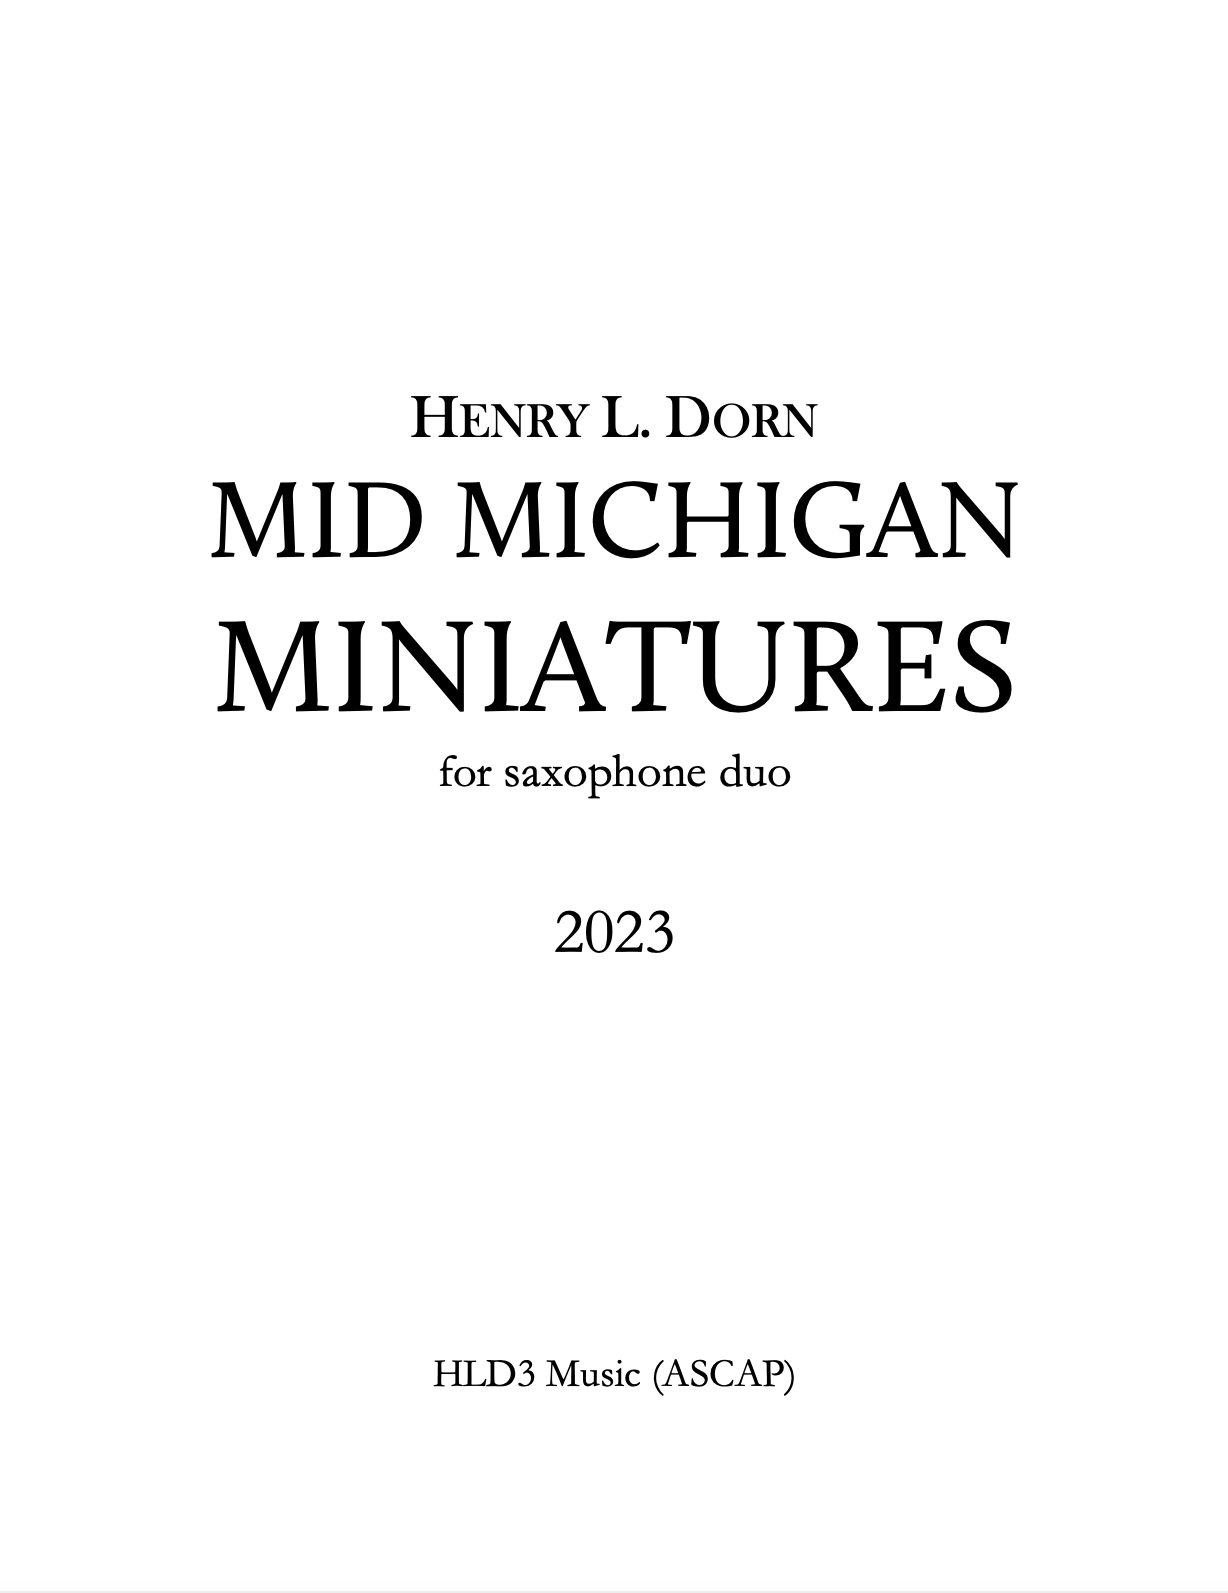 Mid Michigan Miniatures by Henry Dorn